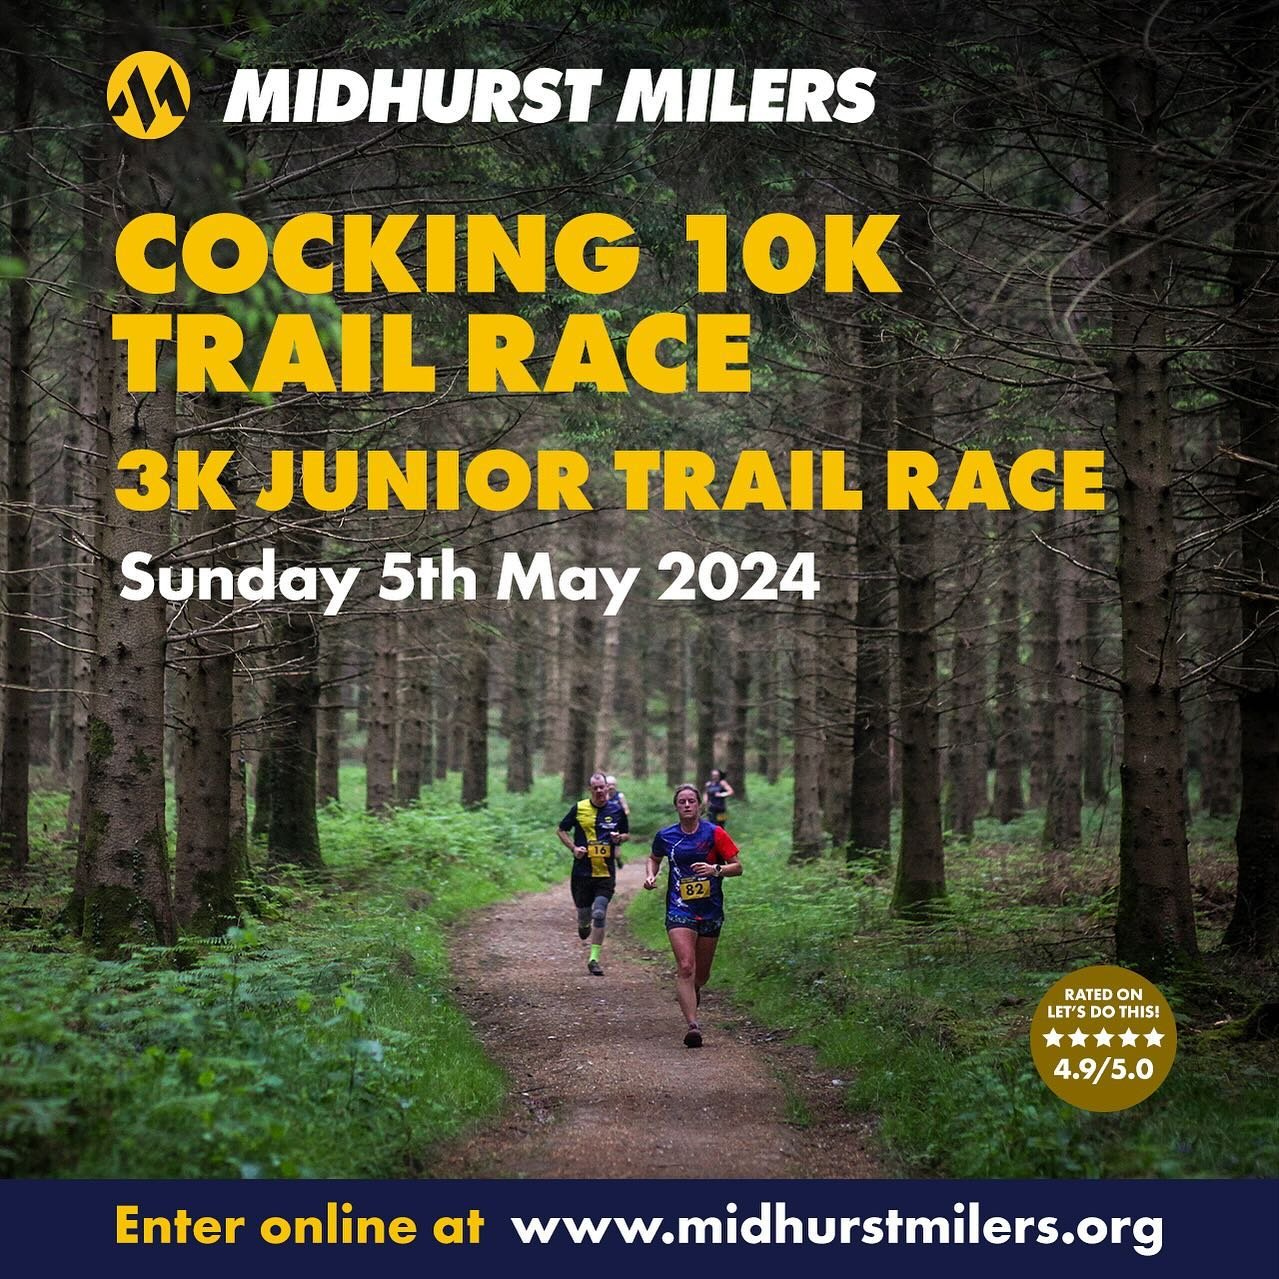 Not long to go before this year&rsquo;s Cocking Trail Race 🏃🏃&zwj;♀️🏃&zwj;♂️ We&rsquo;ve already got more entries than last year and we&rsquo;d love to see you if you&rsquo;ve not already signed up! More details on our website, link in bio. ..

#m